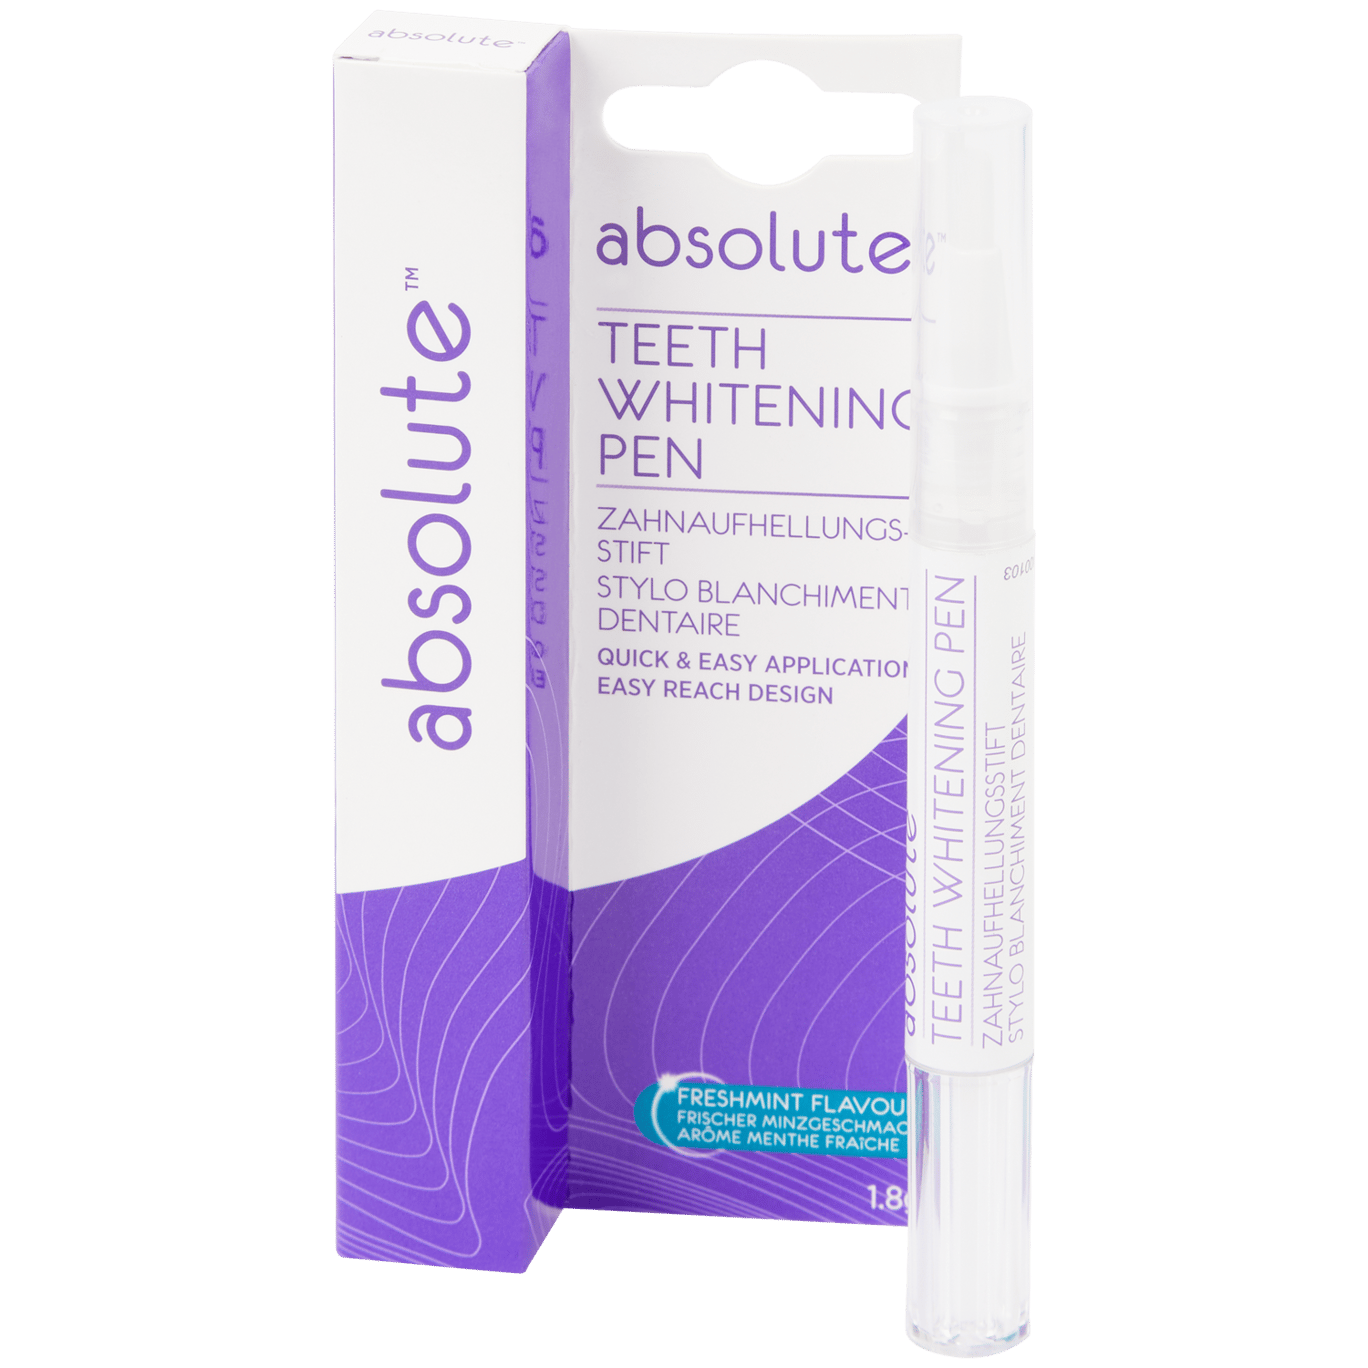 Stylo de blanchiment dentaire Absolute White